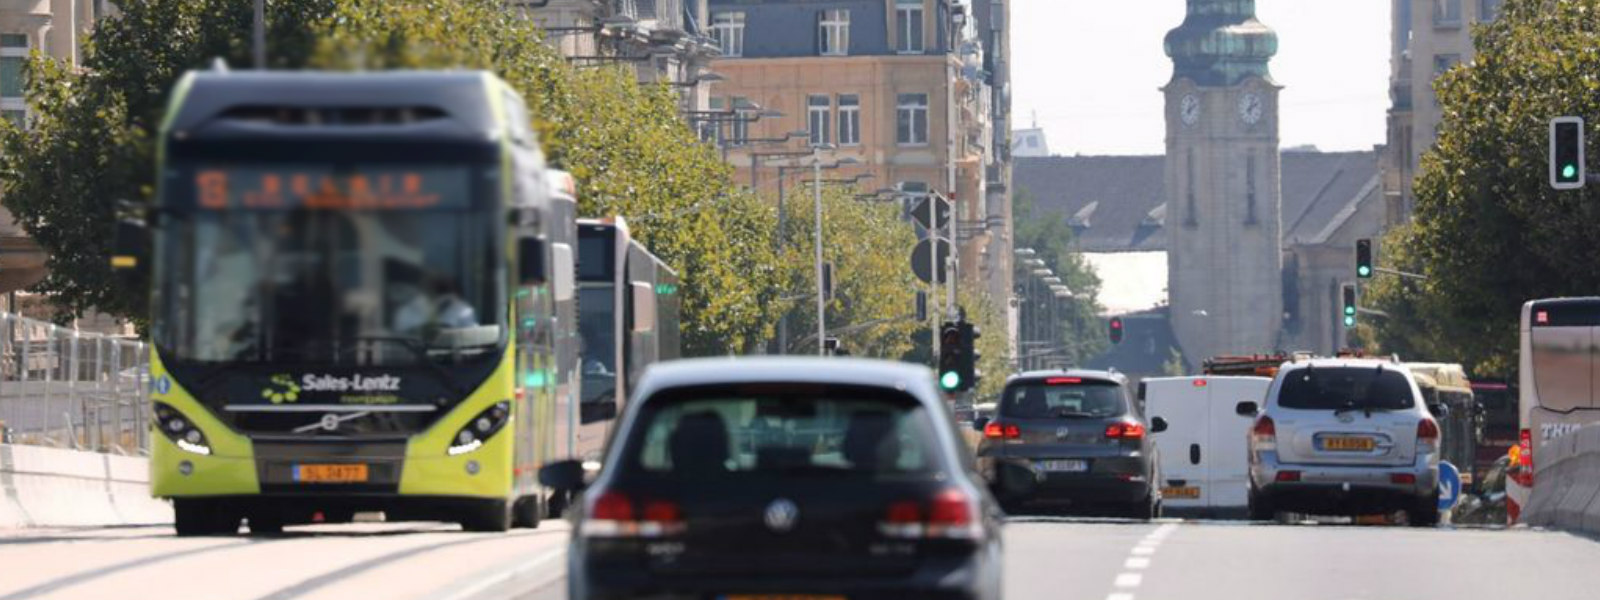 Luxembourg makes public transport free